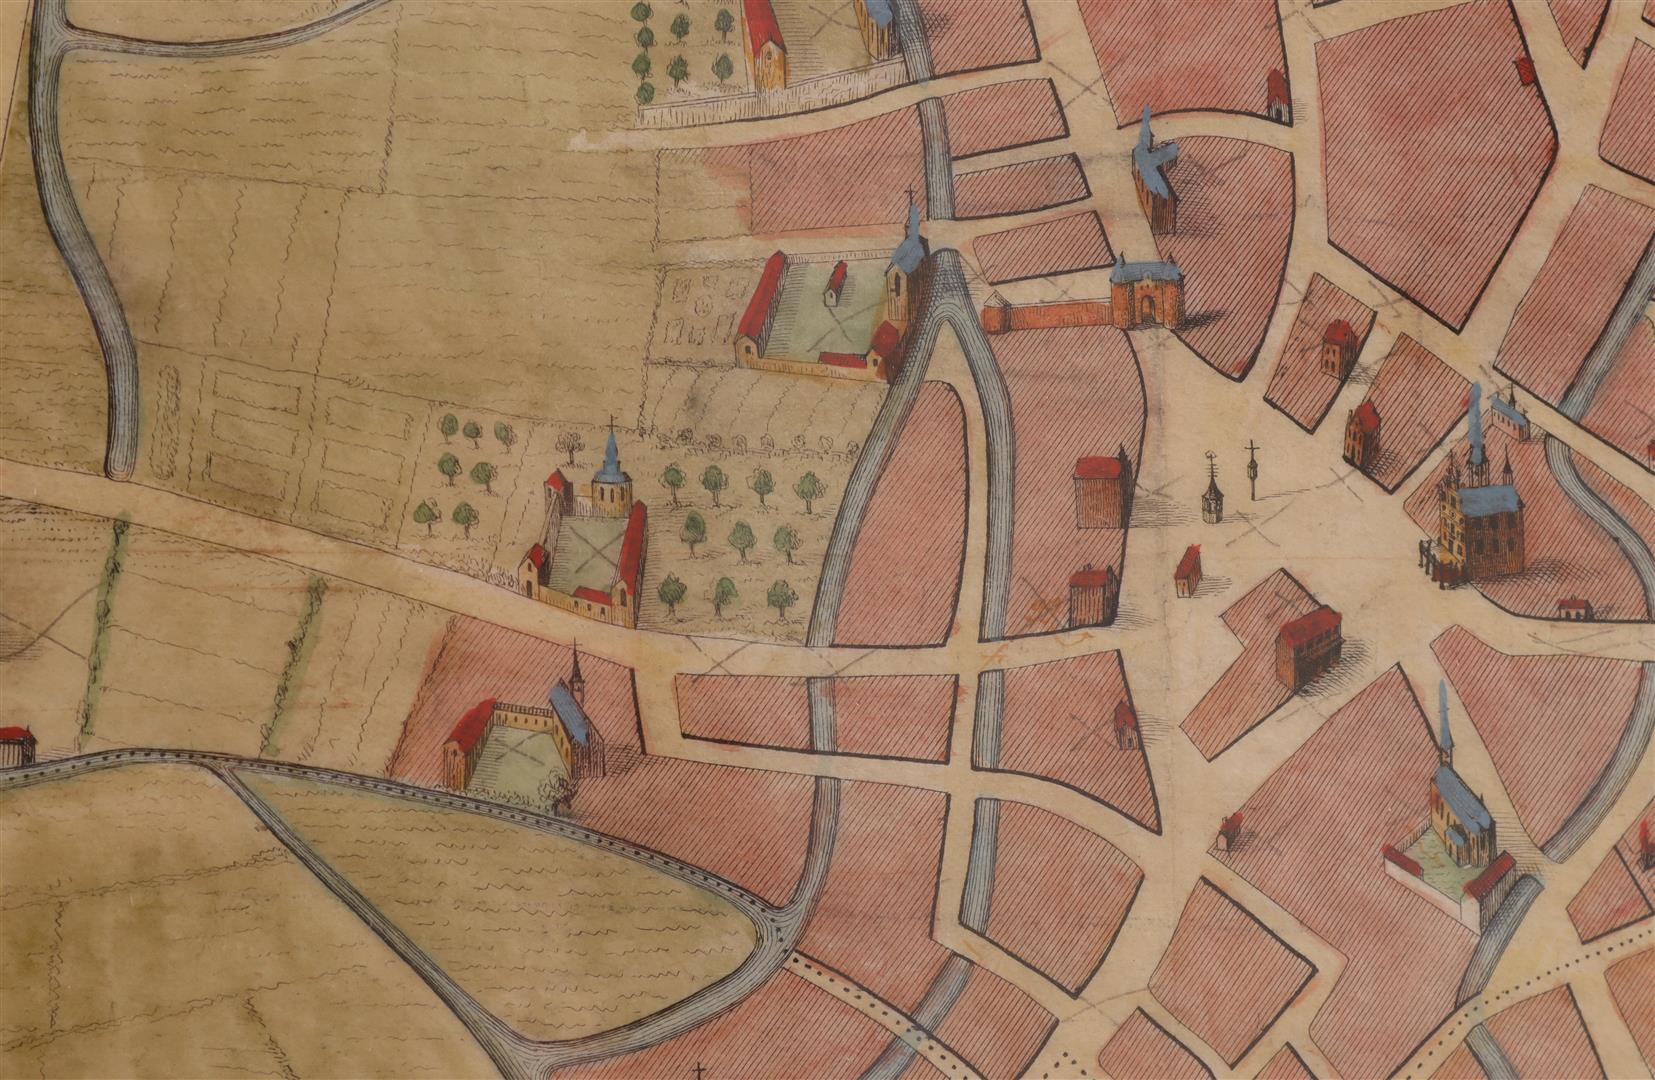 Colored map of Bois-Le-Duc - Image 2 of 4